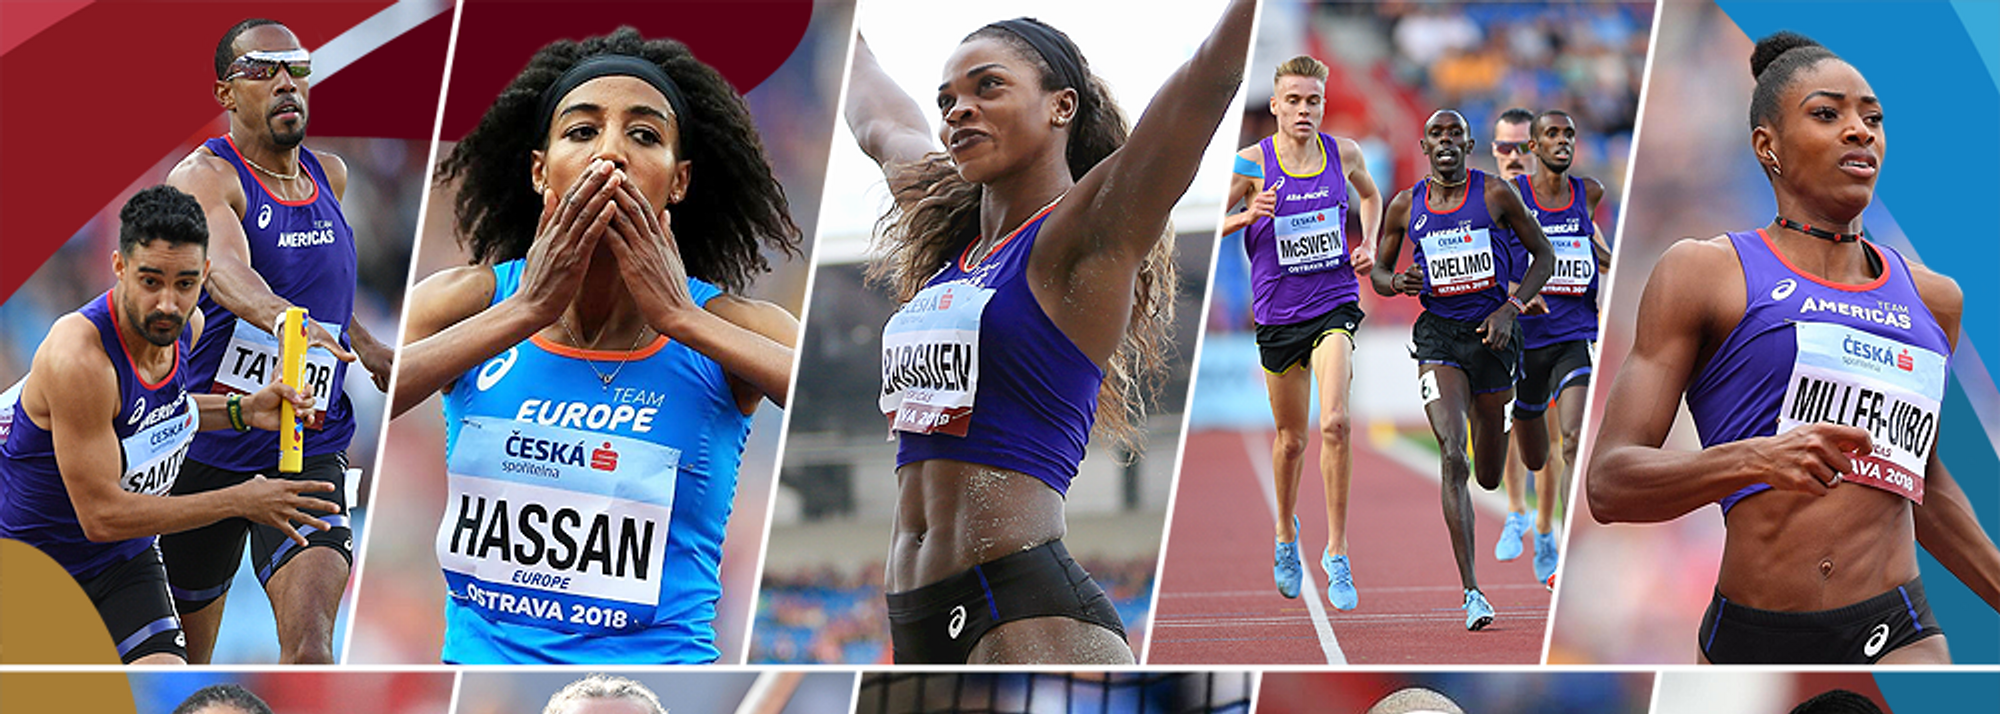 After two afternoons of non-stop action, the IAAF Continental Cup Ostrava 2018 concluded on Sunday with Americas capturing the title after a fierce battle with Europe, the defending champions.